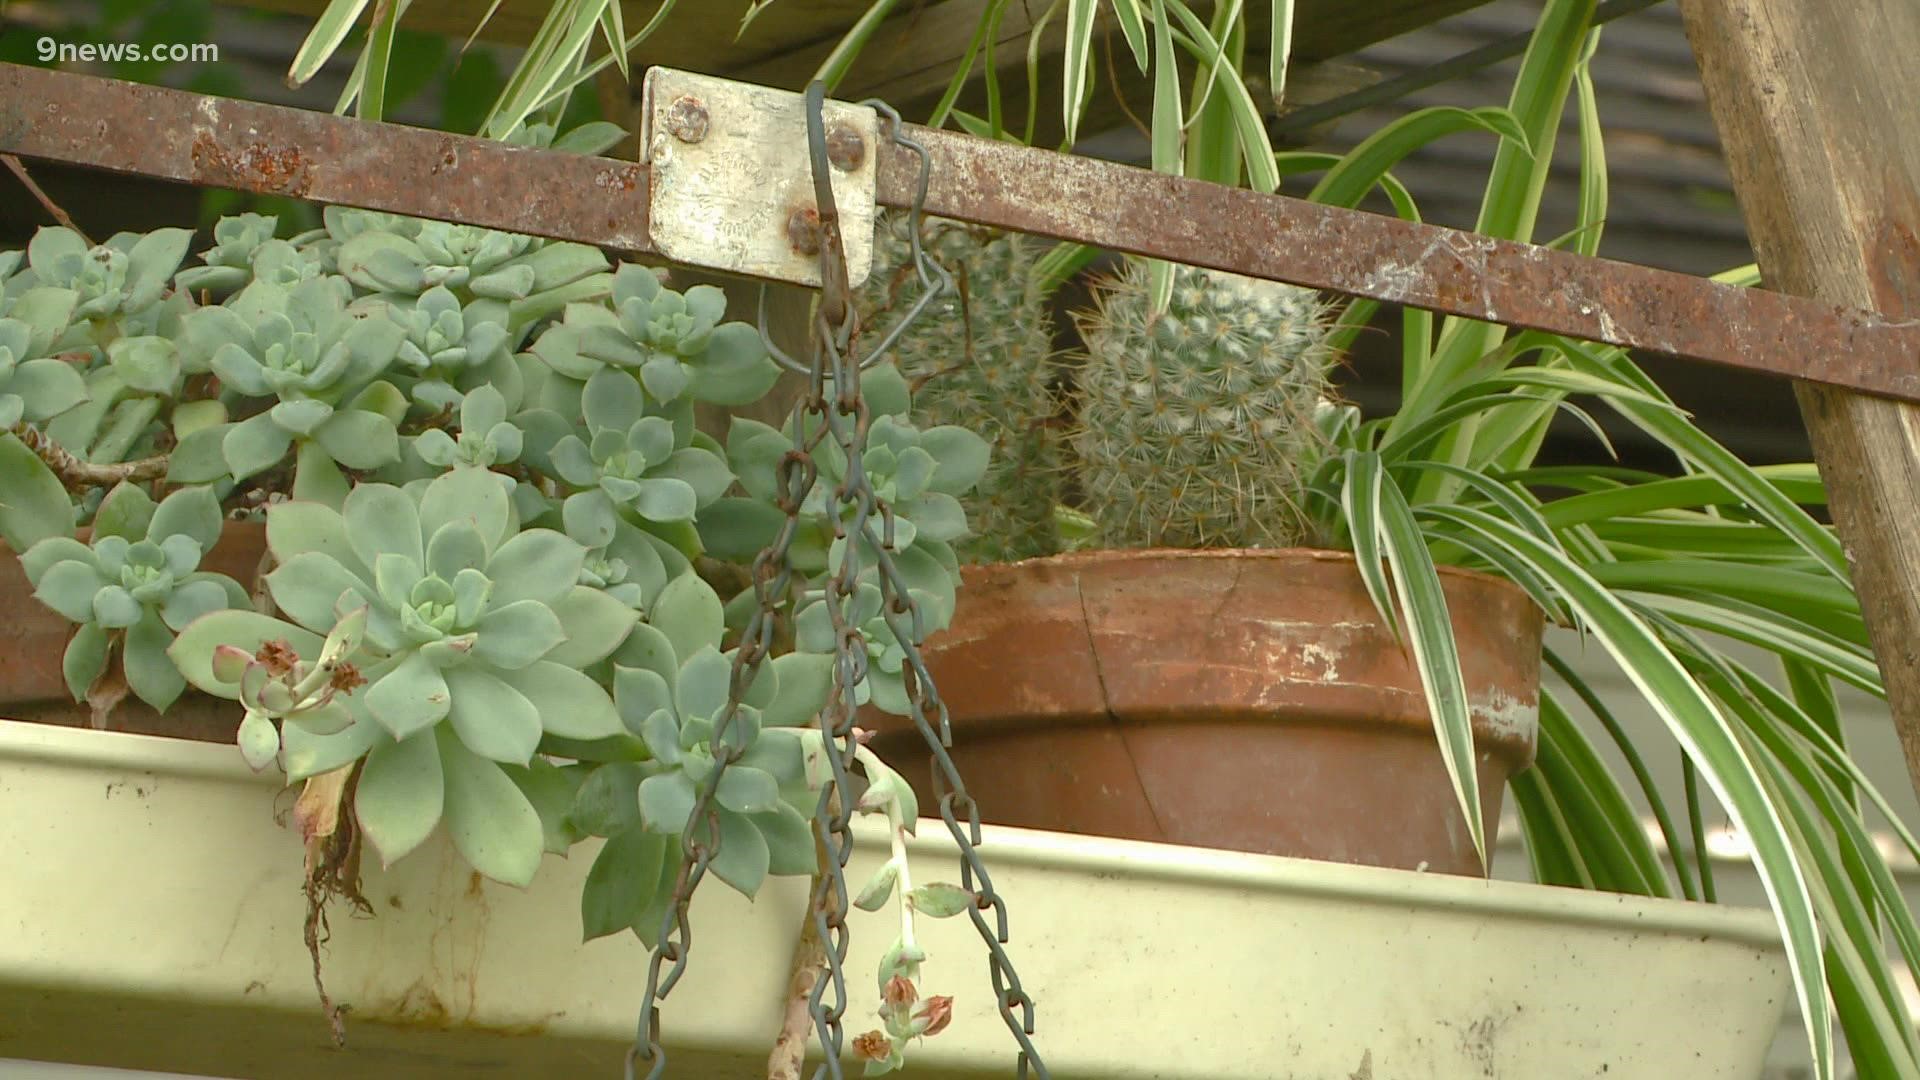 Here's how to get creative to repurpose old items in your garden planting.